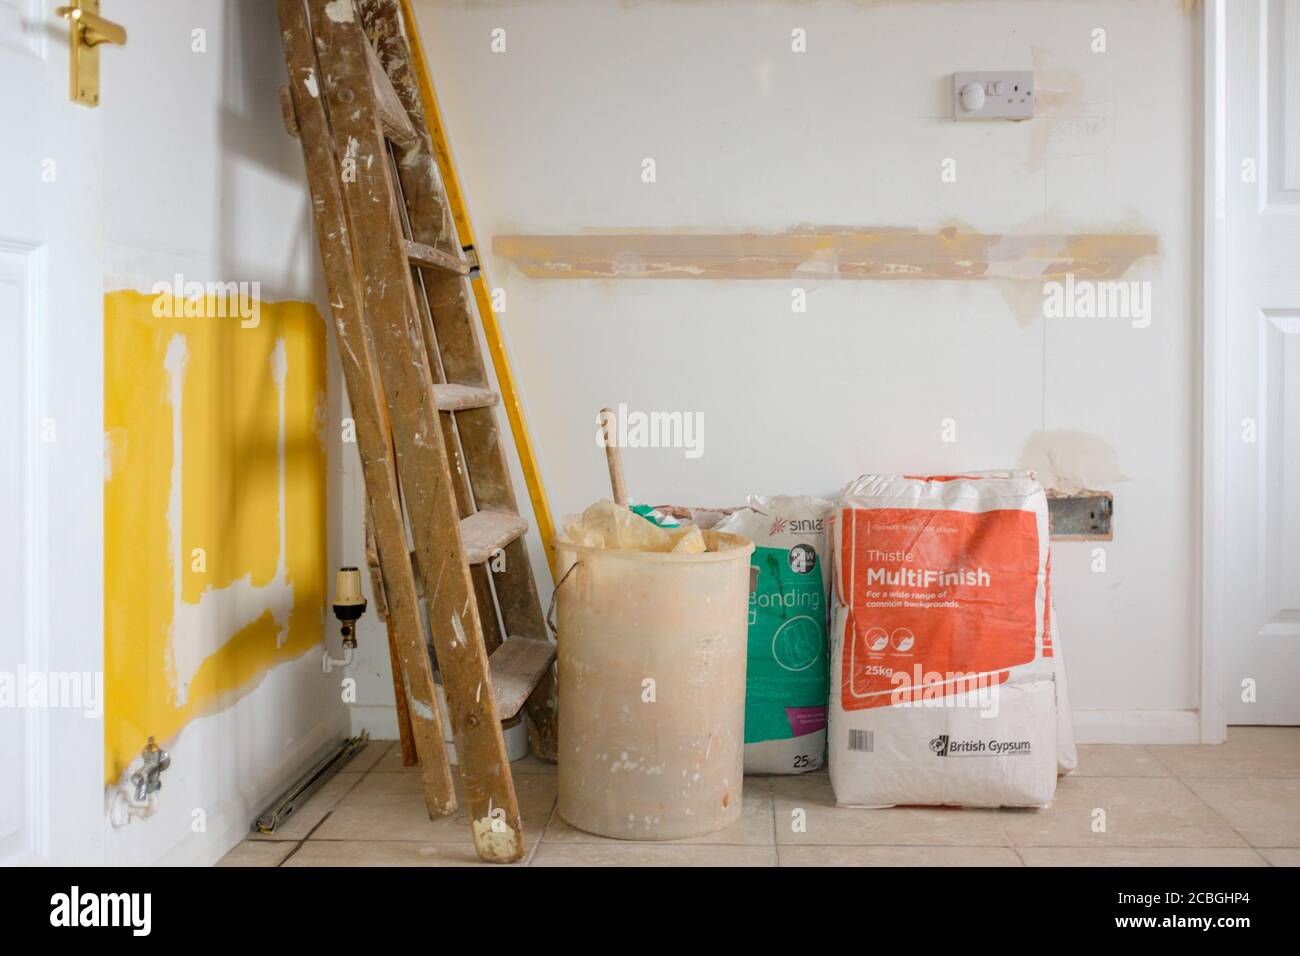 DIY renovation building materials and equipment for home improvement project. UK Stock Photo